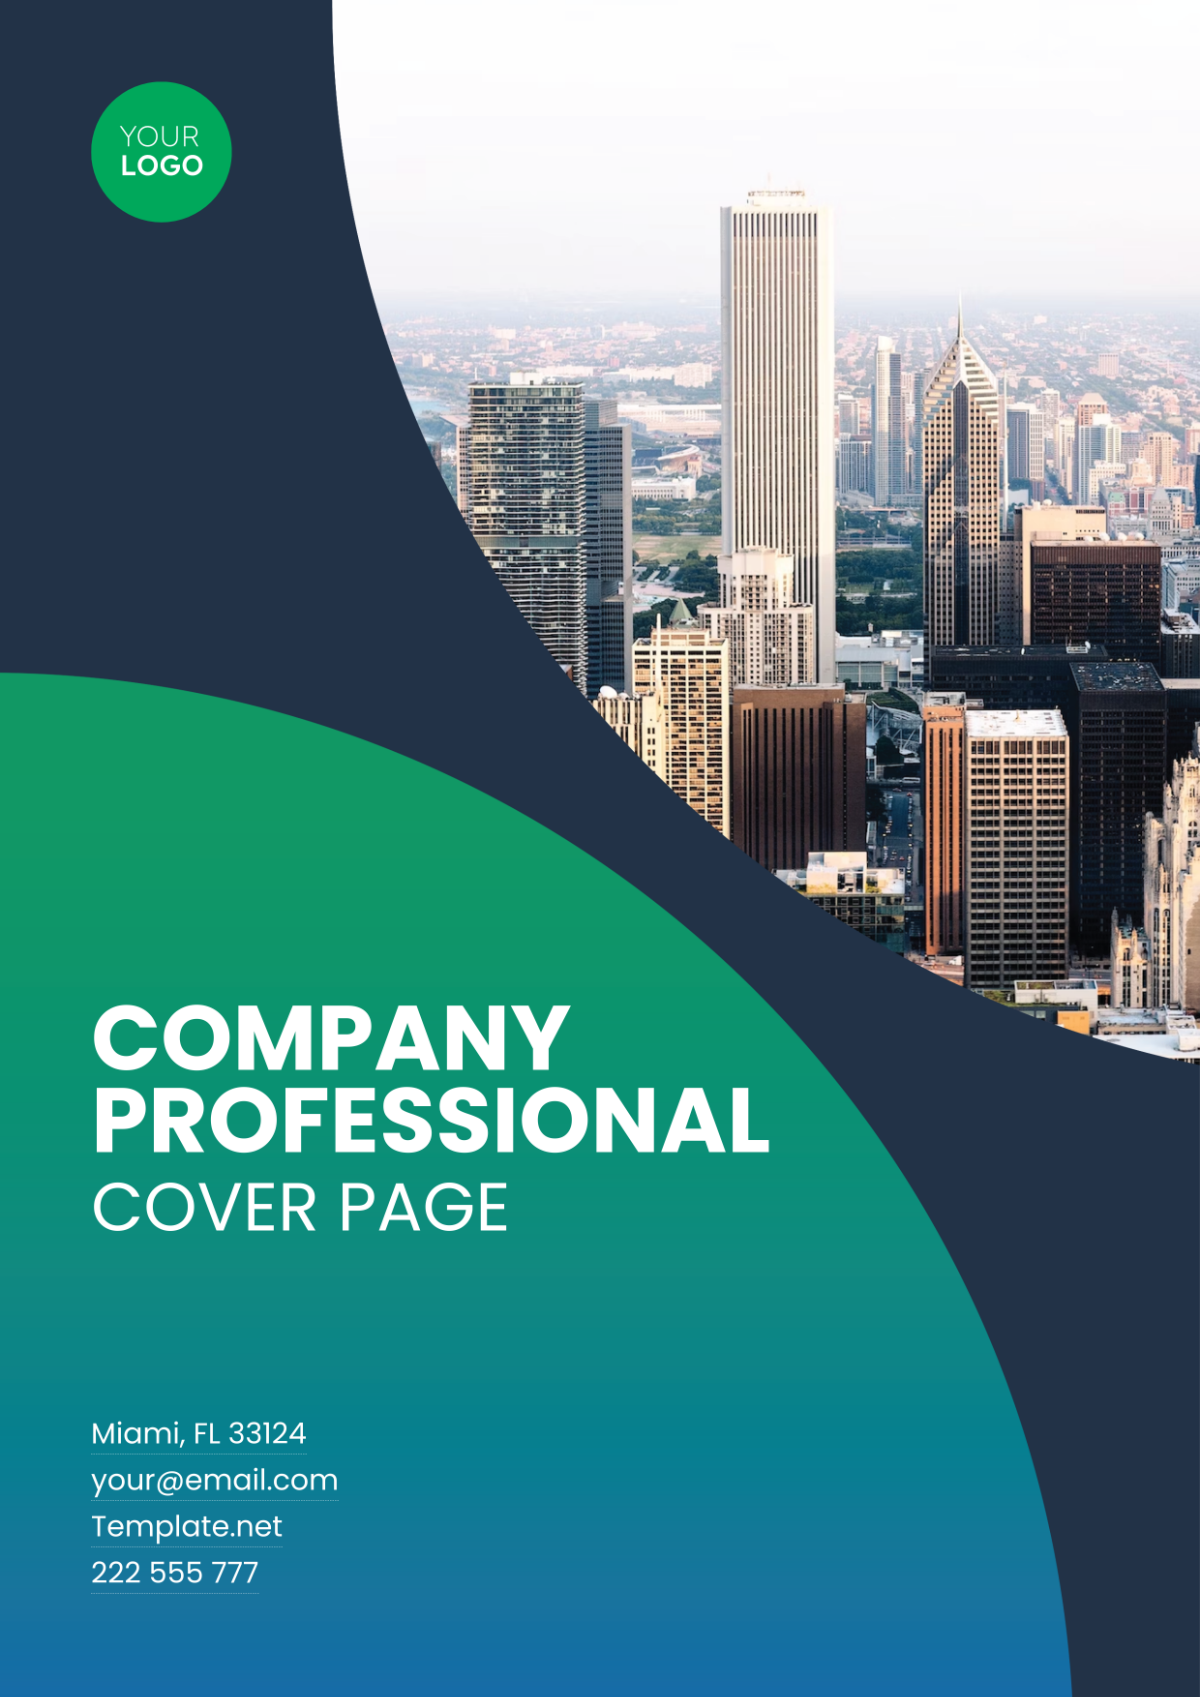 Company Professional Cover Page